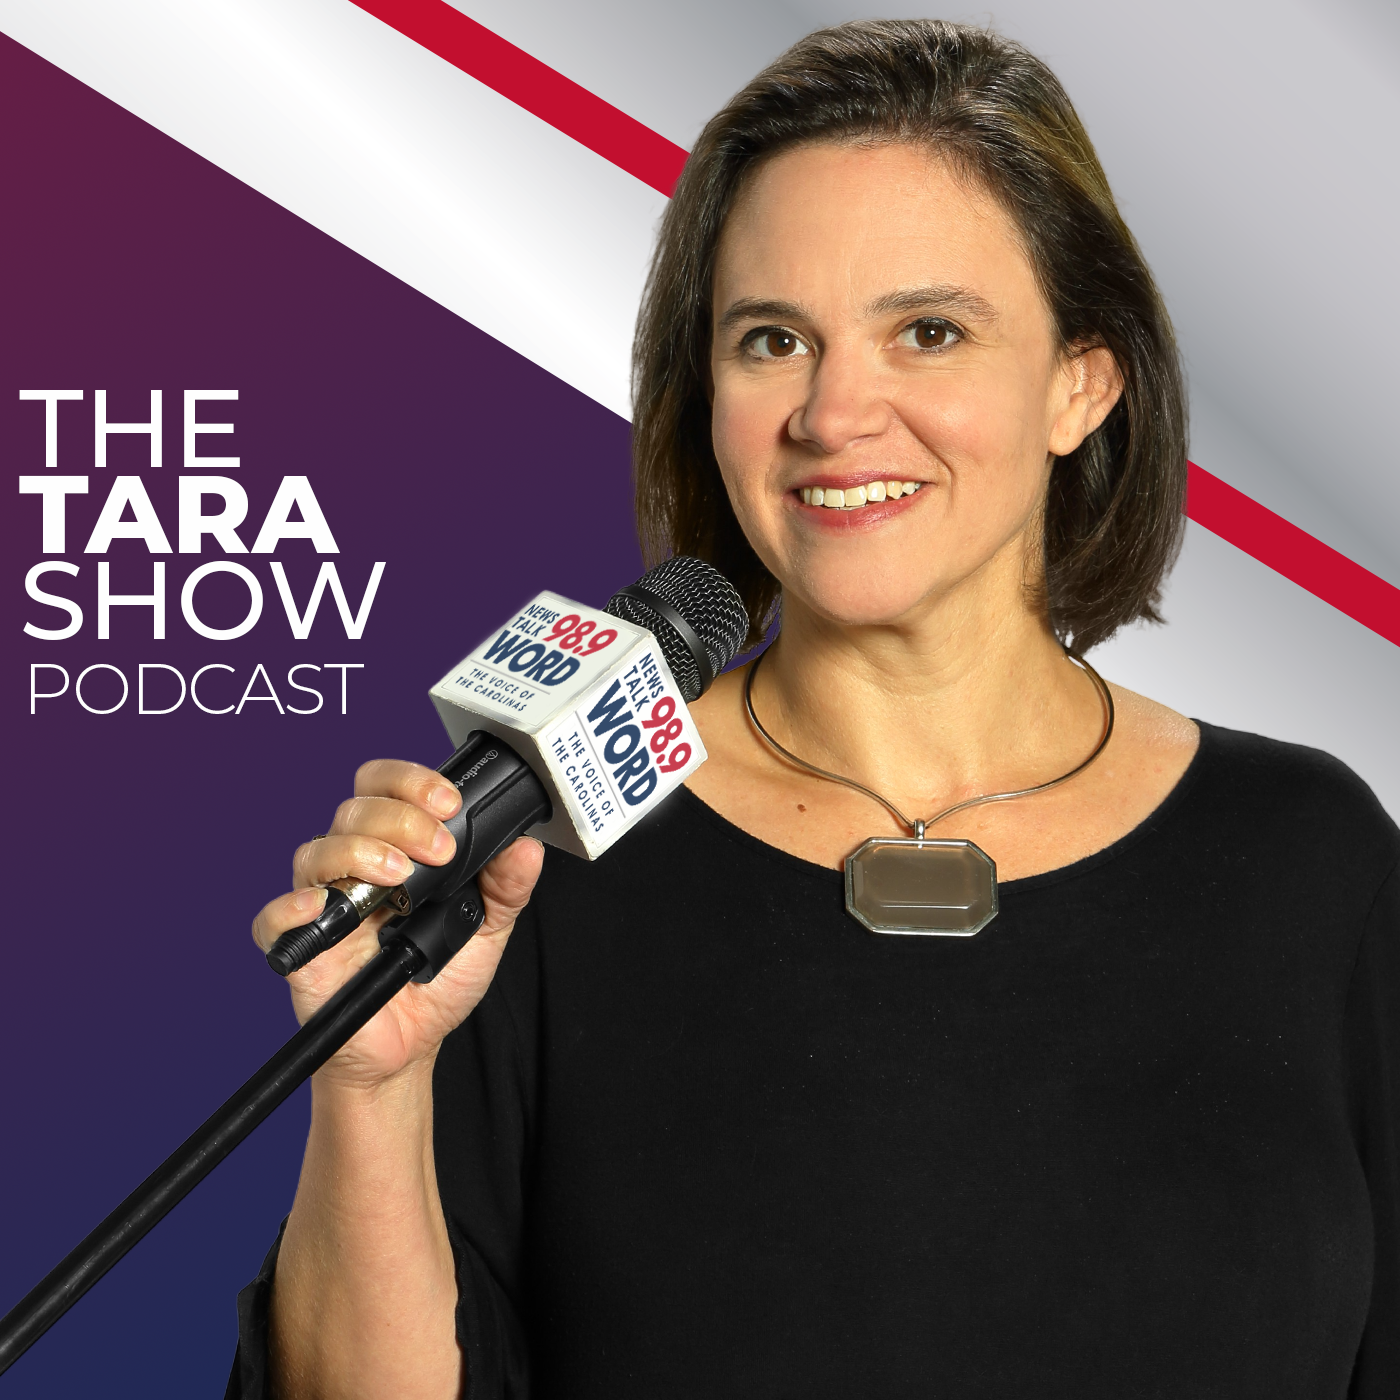 Hour 4: The Tara Show - “Update on Cannibal Gate” “Diving with Gators” “ The GAZA Protests” “Trump’s Documents vs Obama’s”